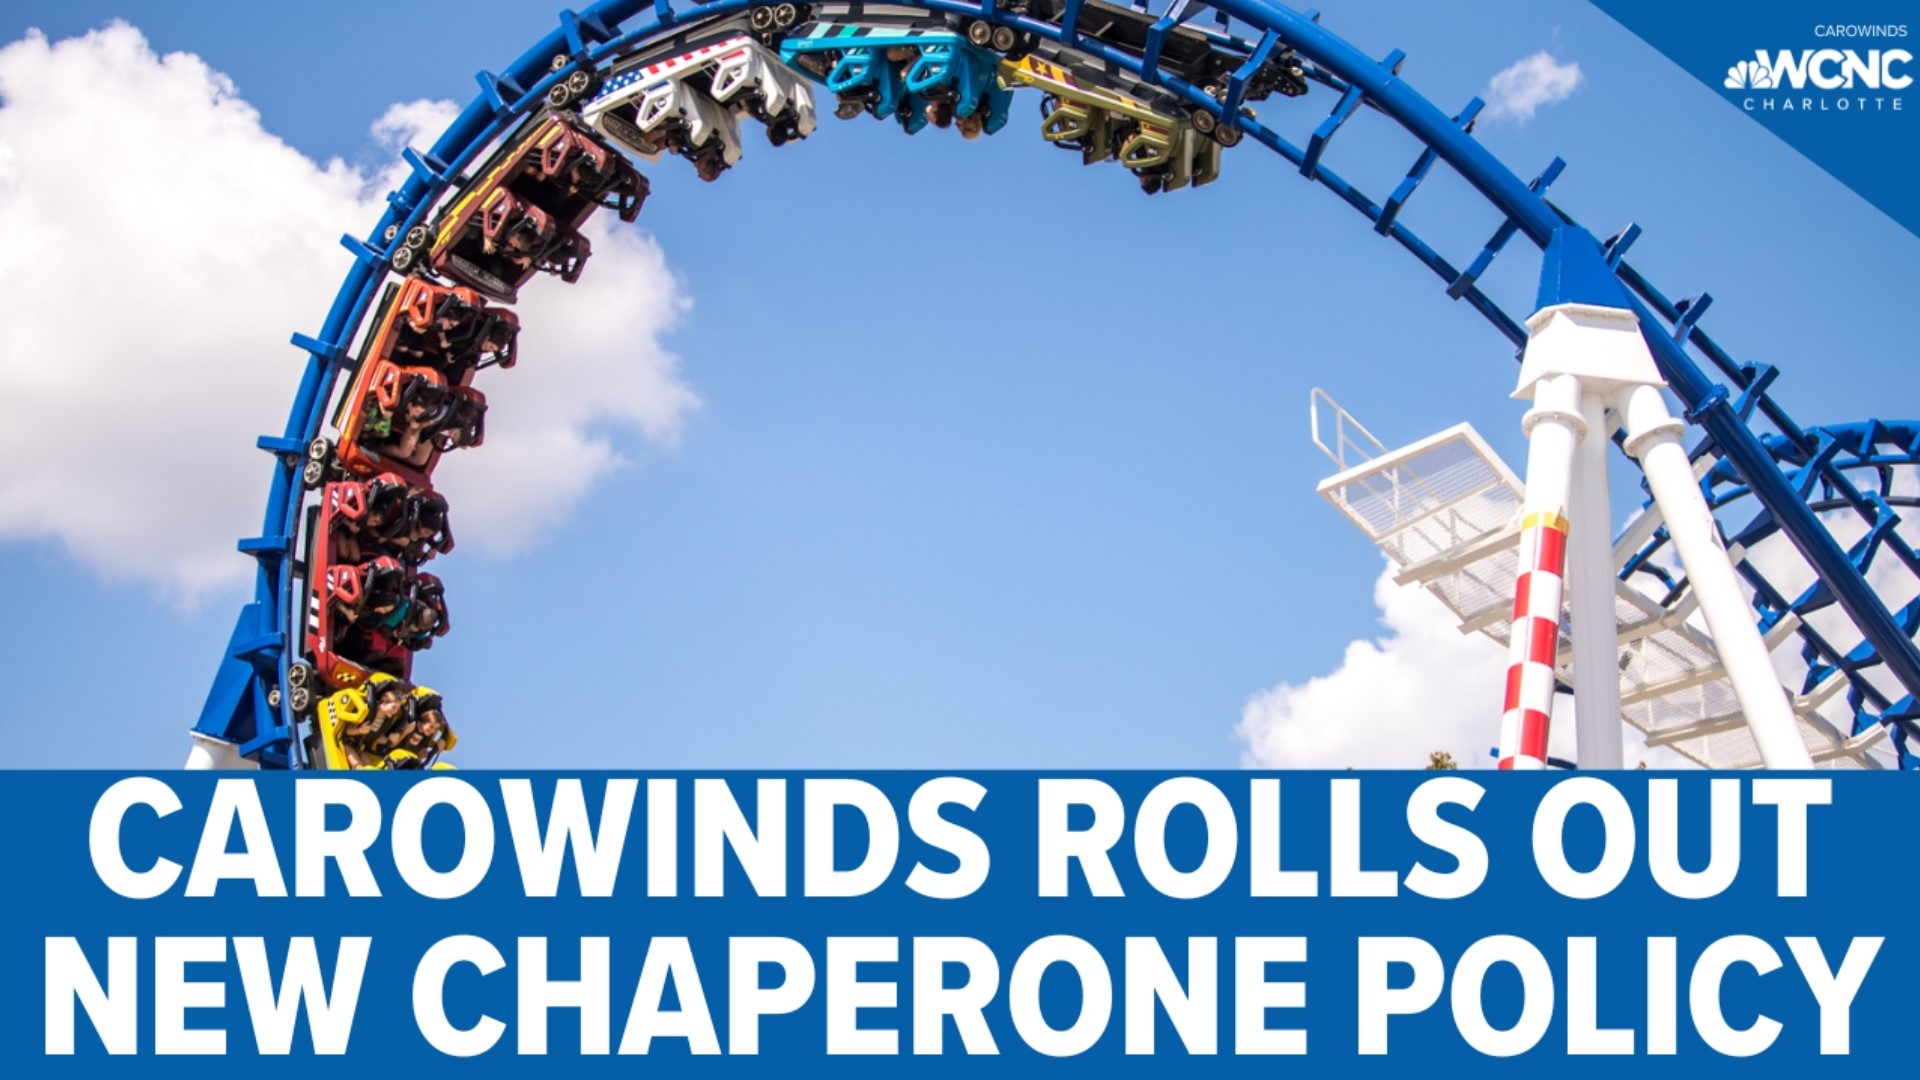 Carowinds announced a new chaperone policy Tuesday following an incident Saturday that set off a panic among guests.